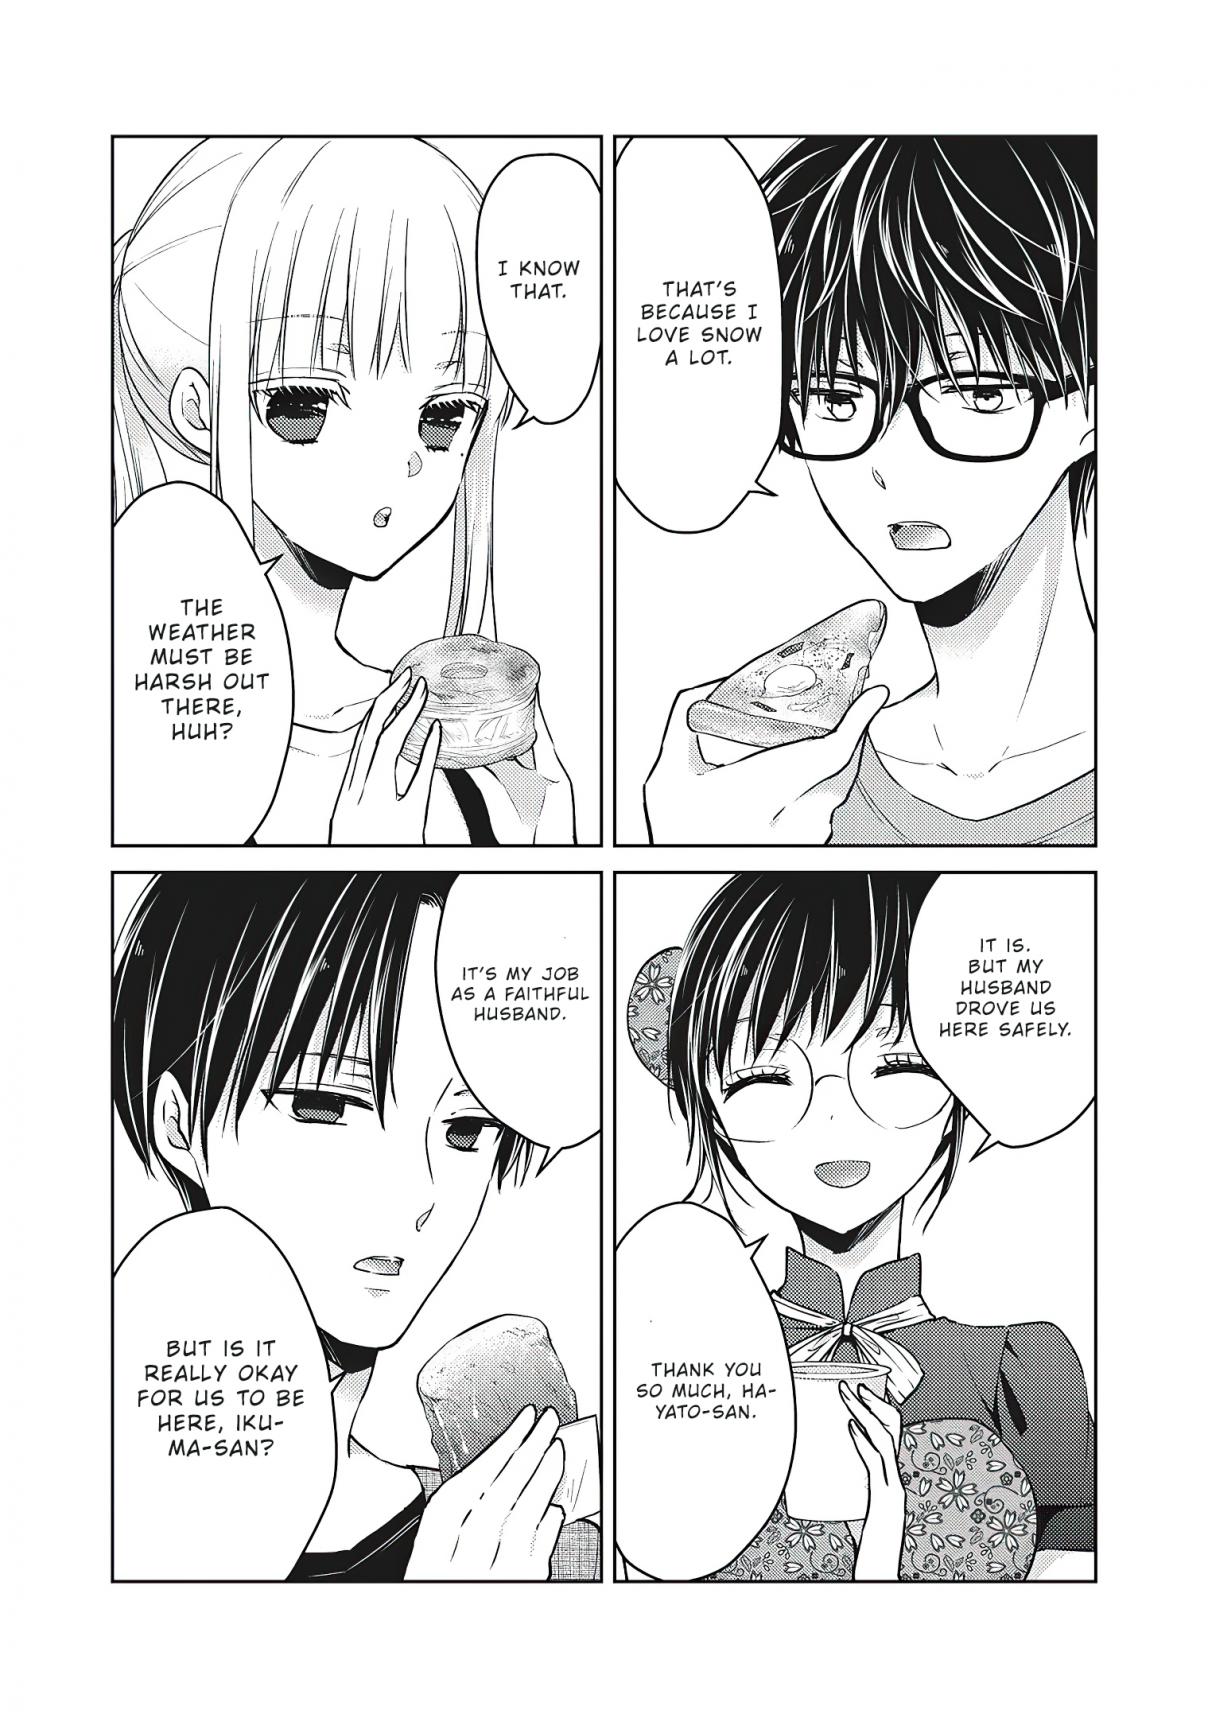 We May Be an Inexperienced Couple but... Vol. 7 Ch. 53 Let's Play Inside